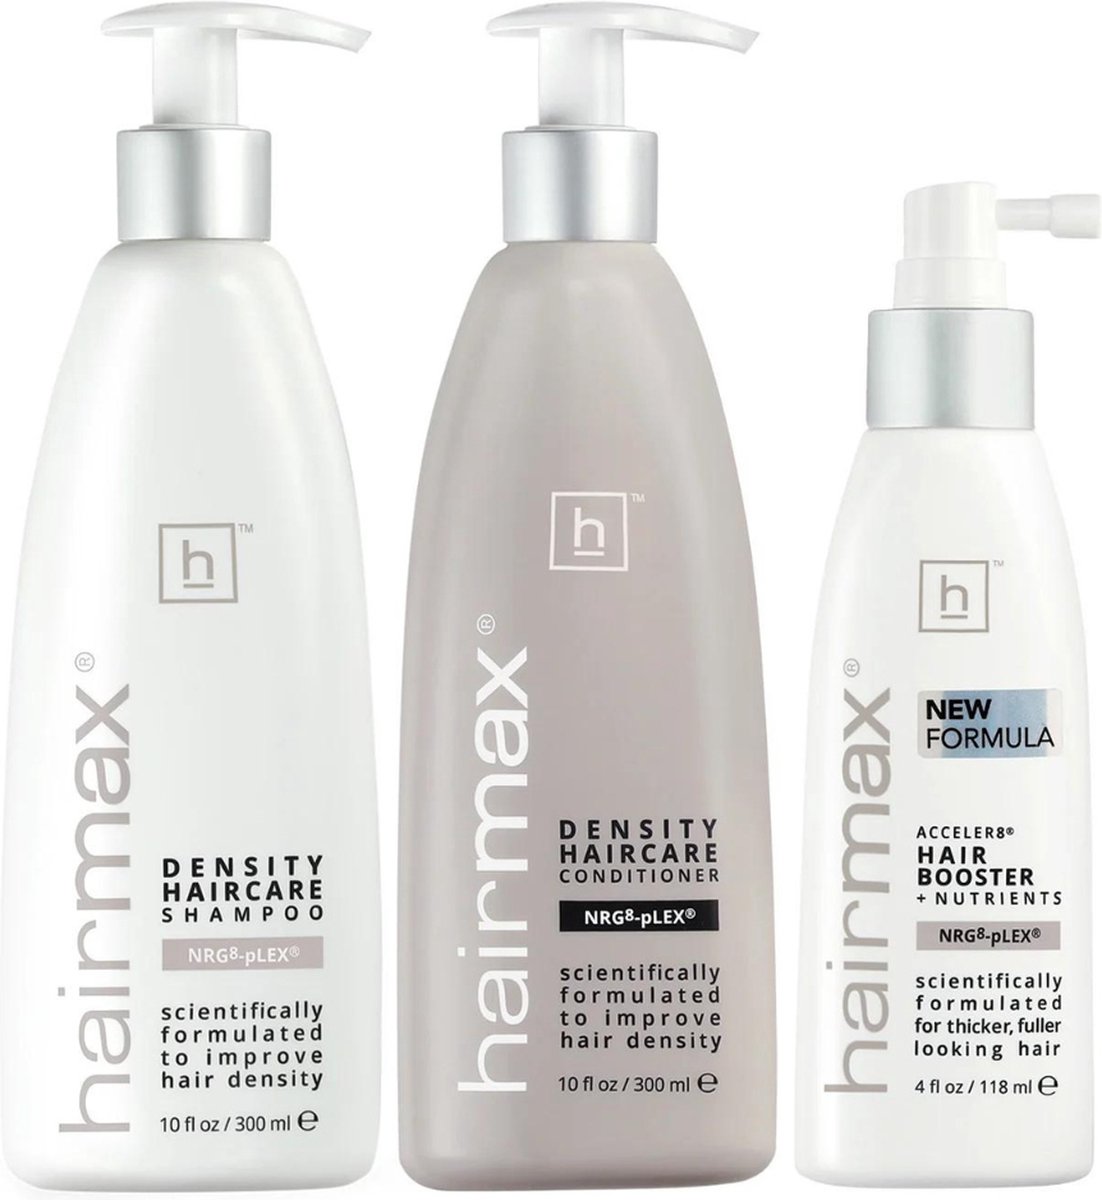 Hairmax Starter Kit - New & Improved (Acclr8, Exhilr8, Stimul8)